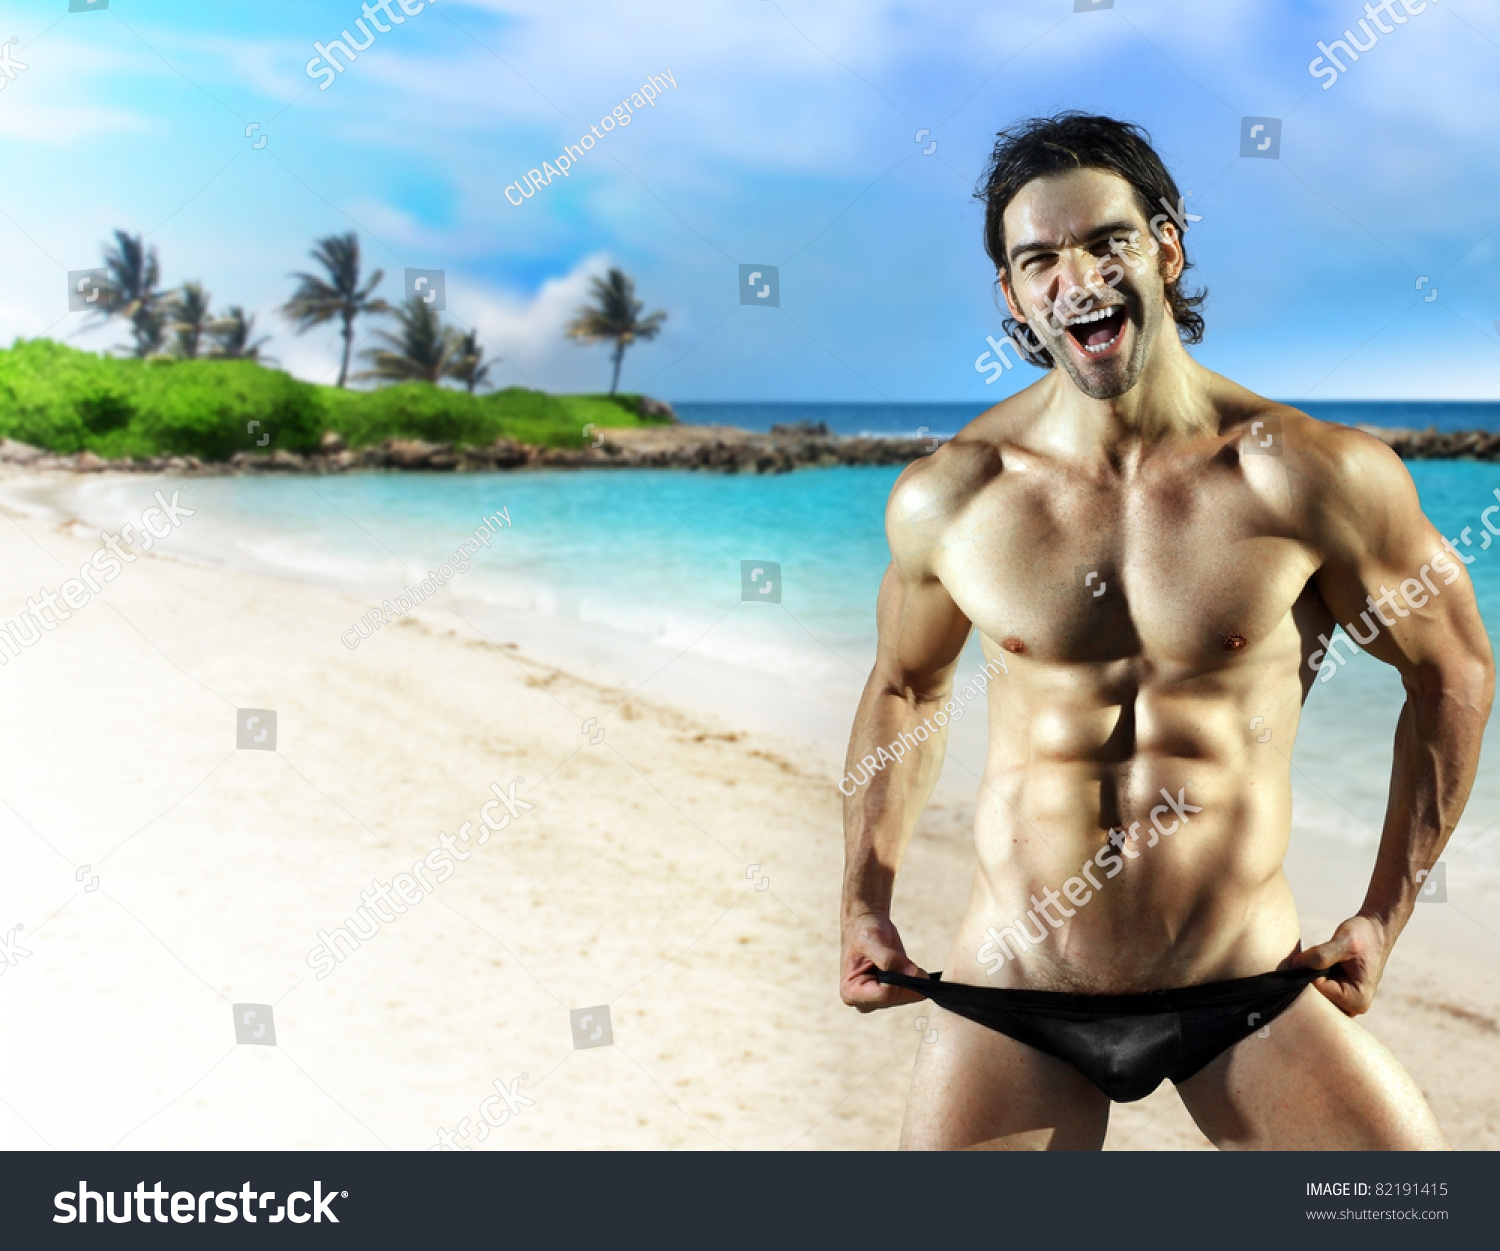 Male fitness model — Stock Photo © curaphotography #41489827